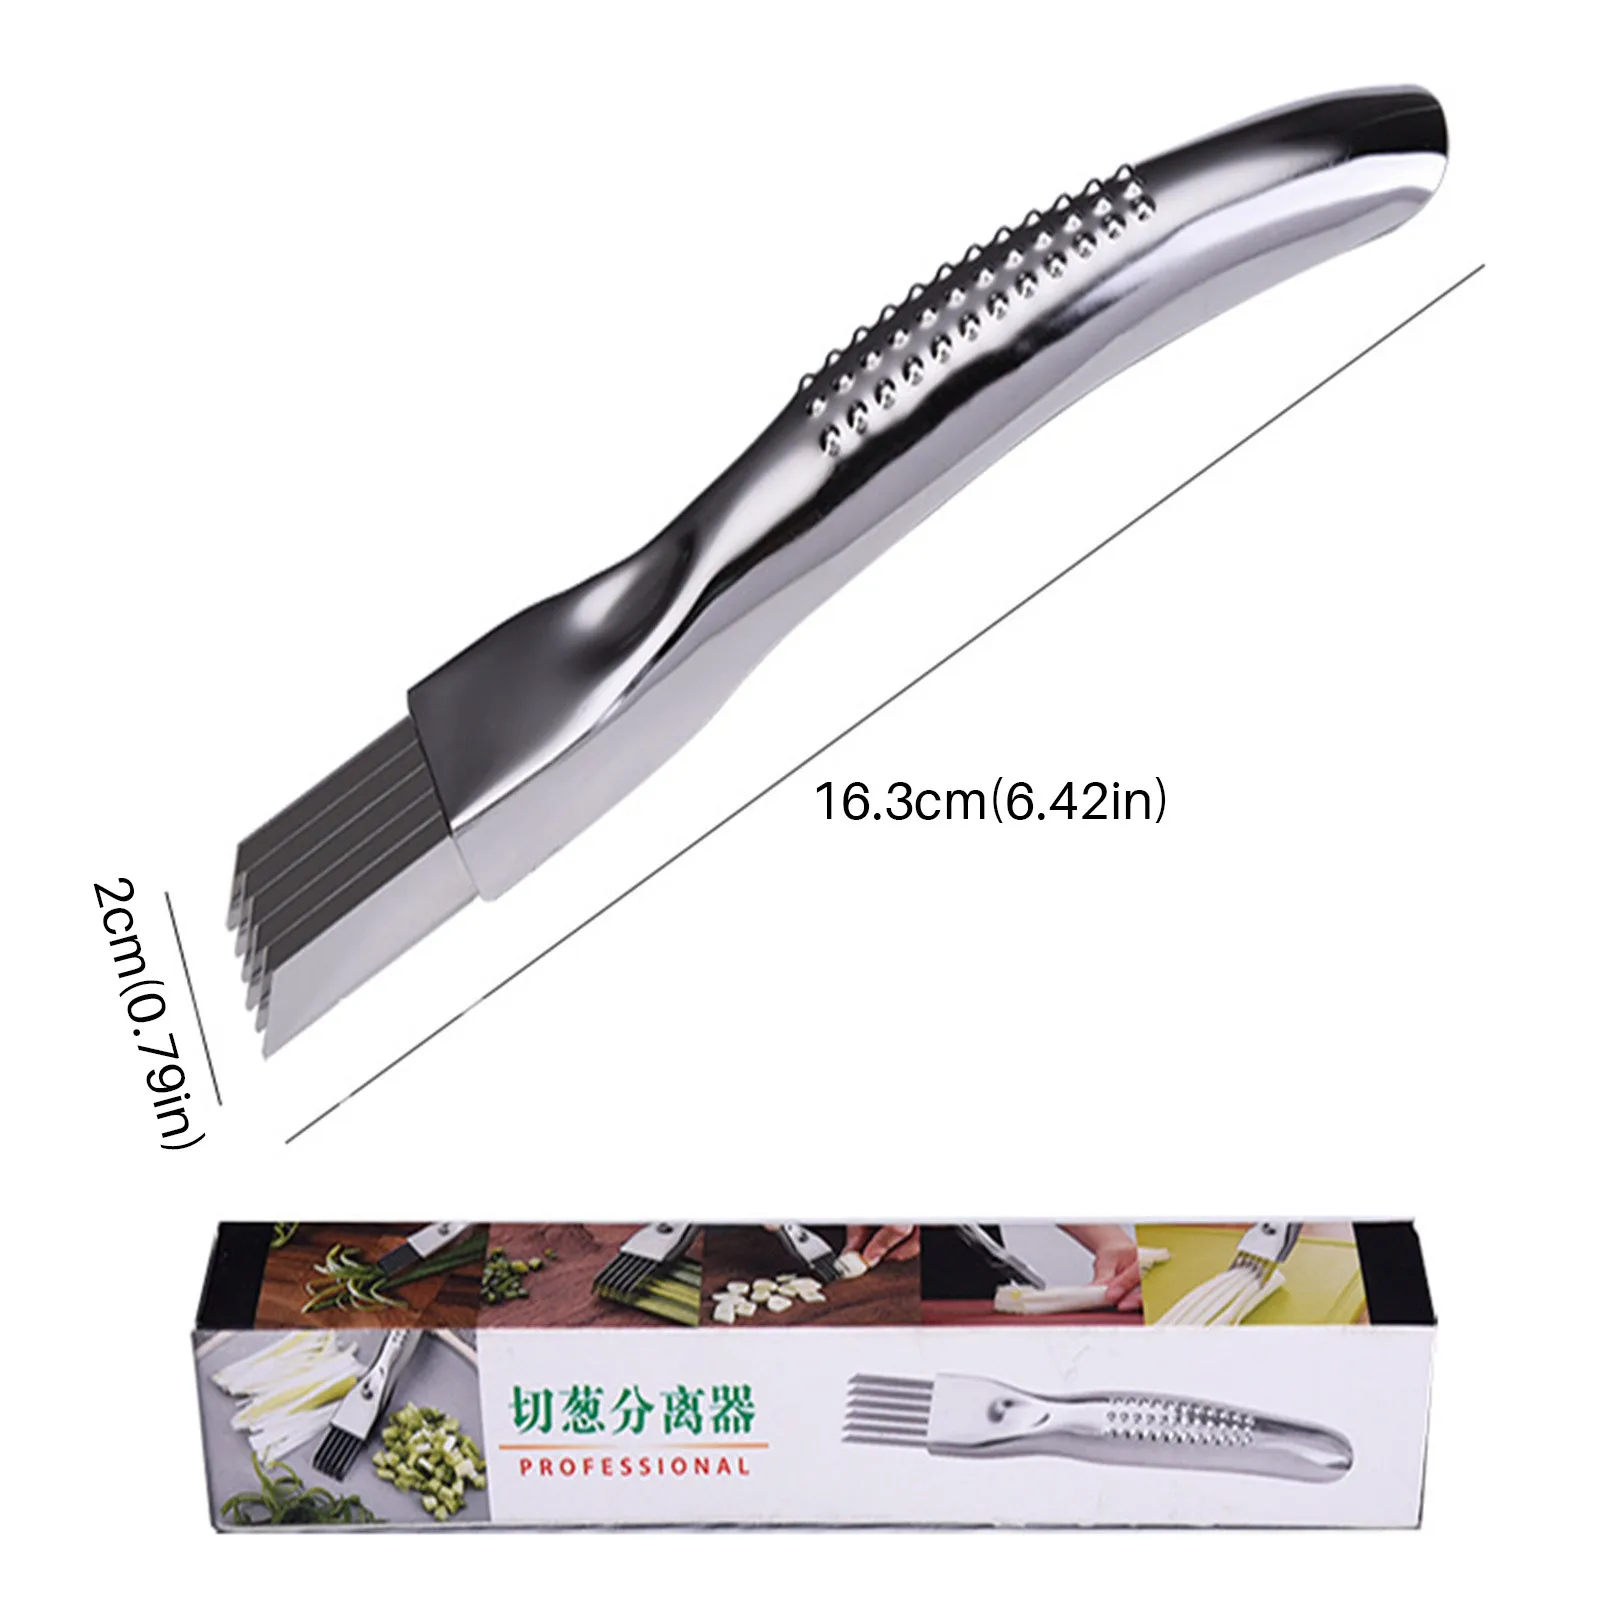 

Shred Silk The Knife Vegetable Scallions Cutter Food Kitchen Speedy Chopper Kitchen Accessories Cuisine Outils Accessoires